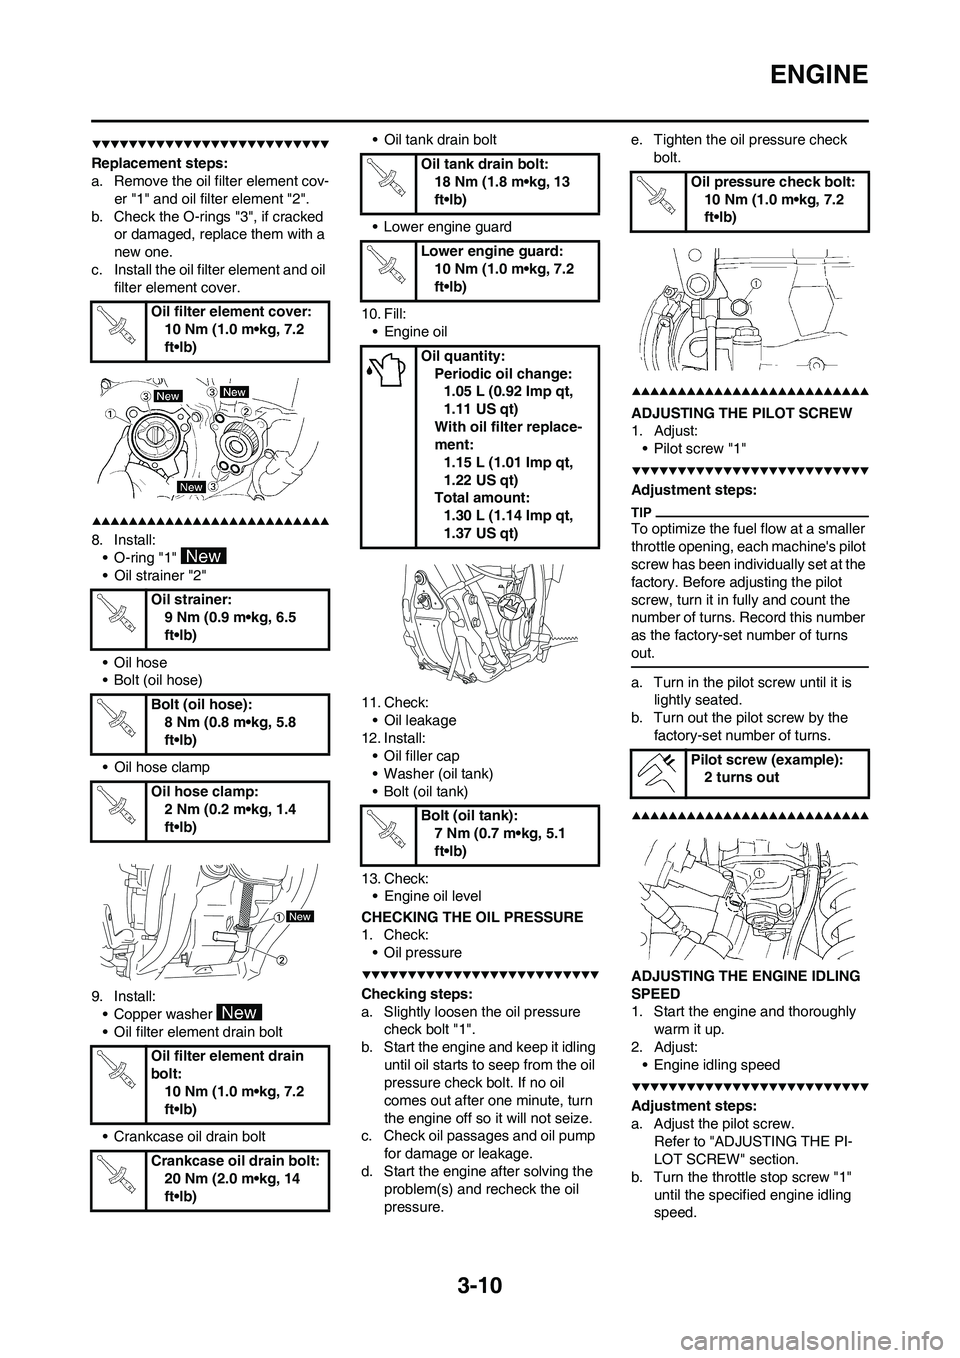 YAMAHA YZ250F 2009  Owners Manual 3-10
ENGINE
Replacement steps:
a. Remove the oil filter element cov-
er "1" and oil filter element "2".
b. Check the O-rings "3", if cracked 
or damaged, replace them with a 
new one.
c. Install the o